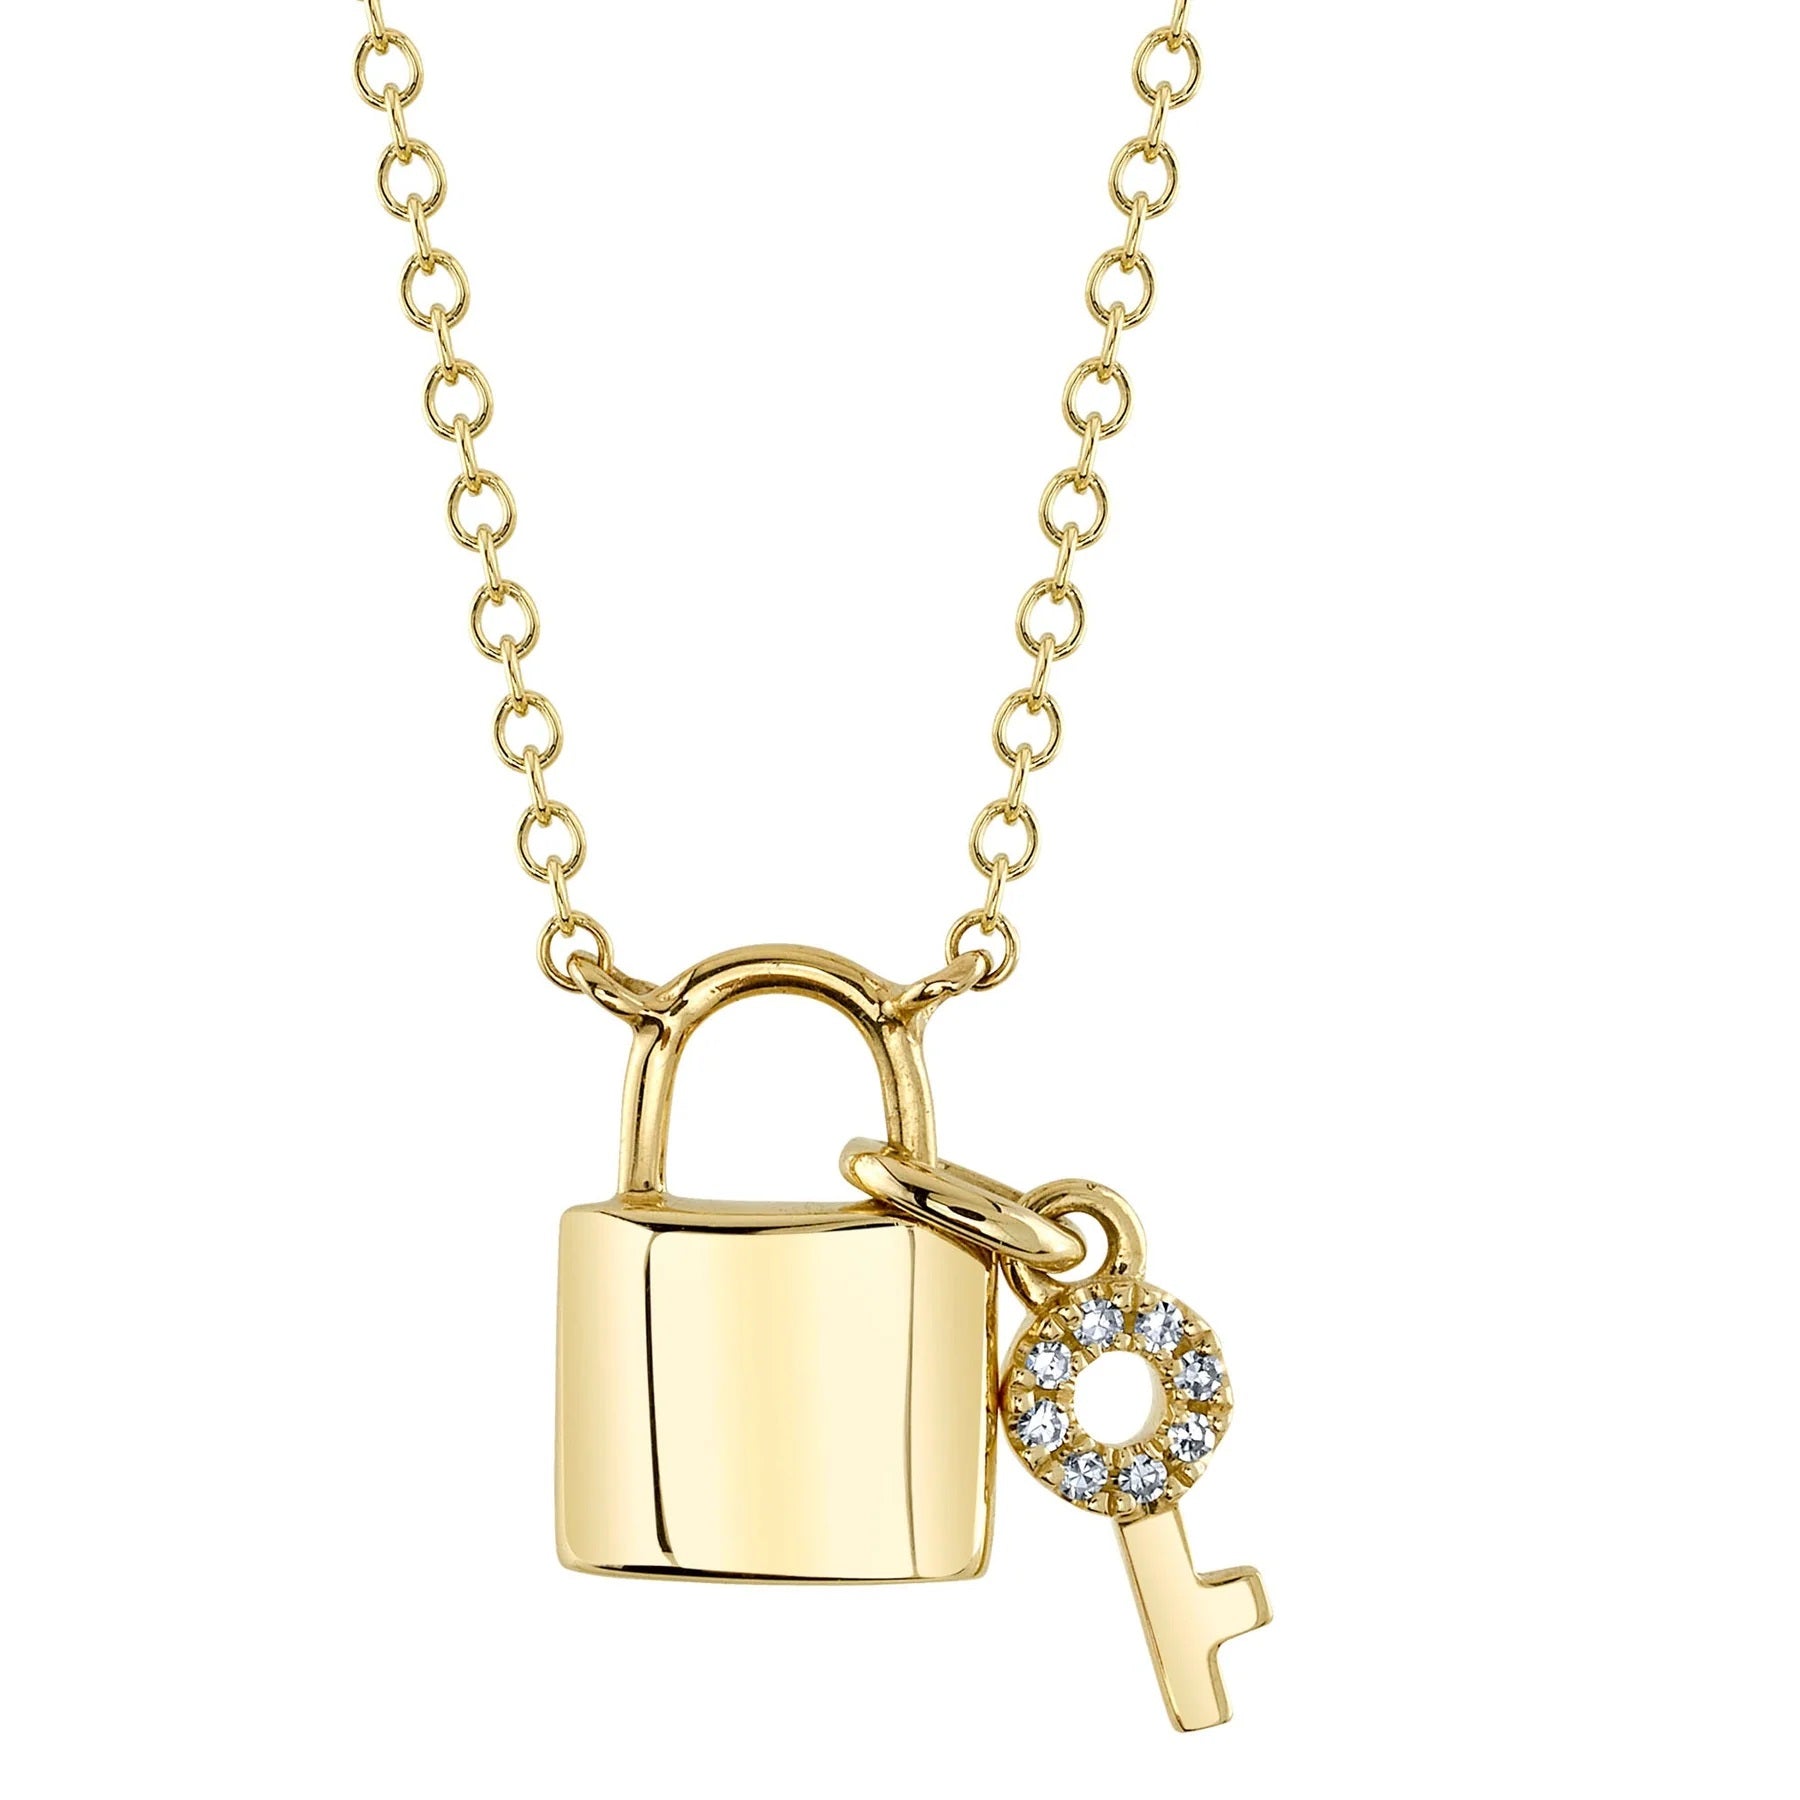 14K YELLOW GOLD LOCK AND KEY NECKLACE WITH DIAMONDS